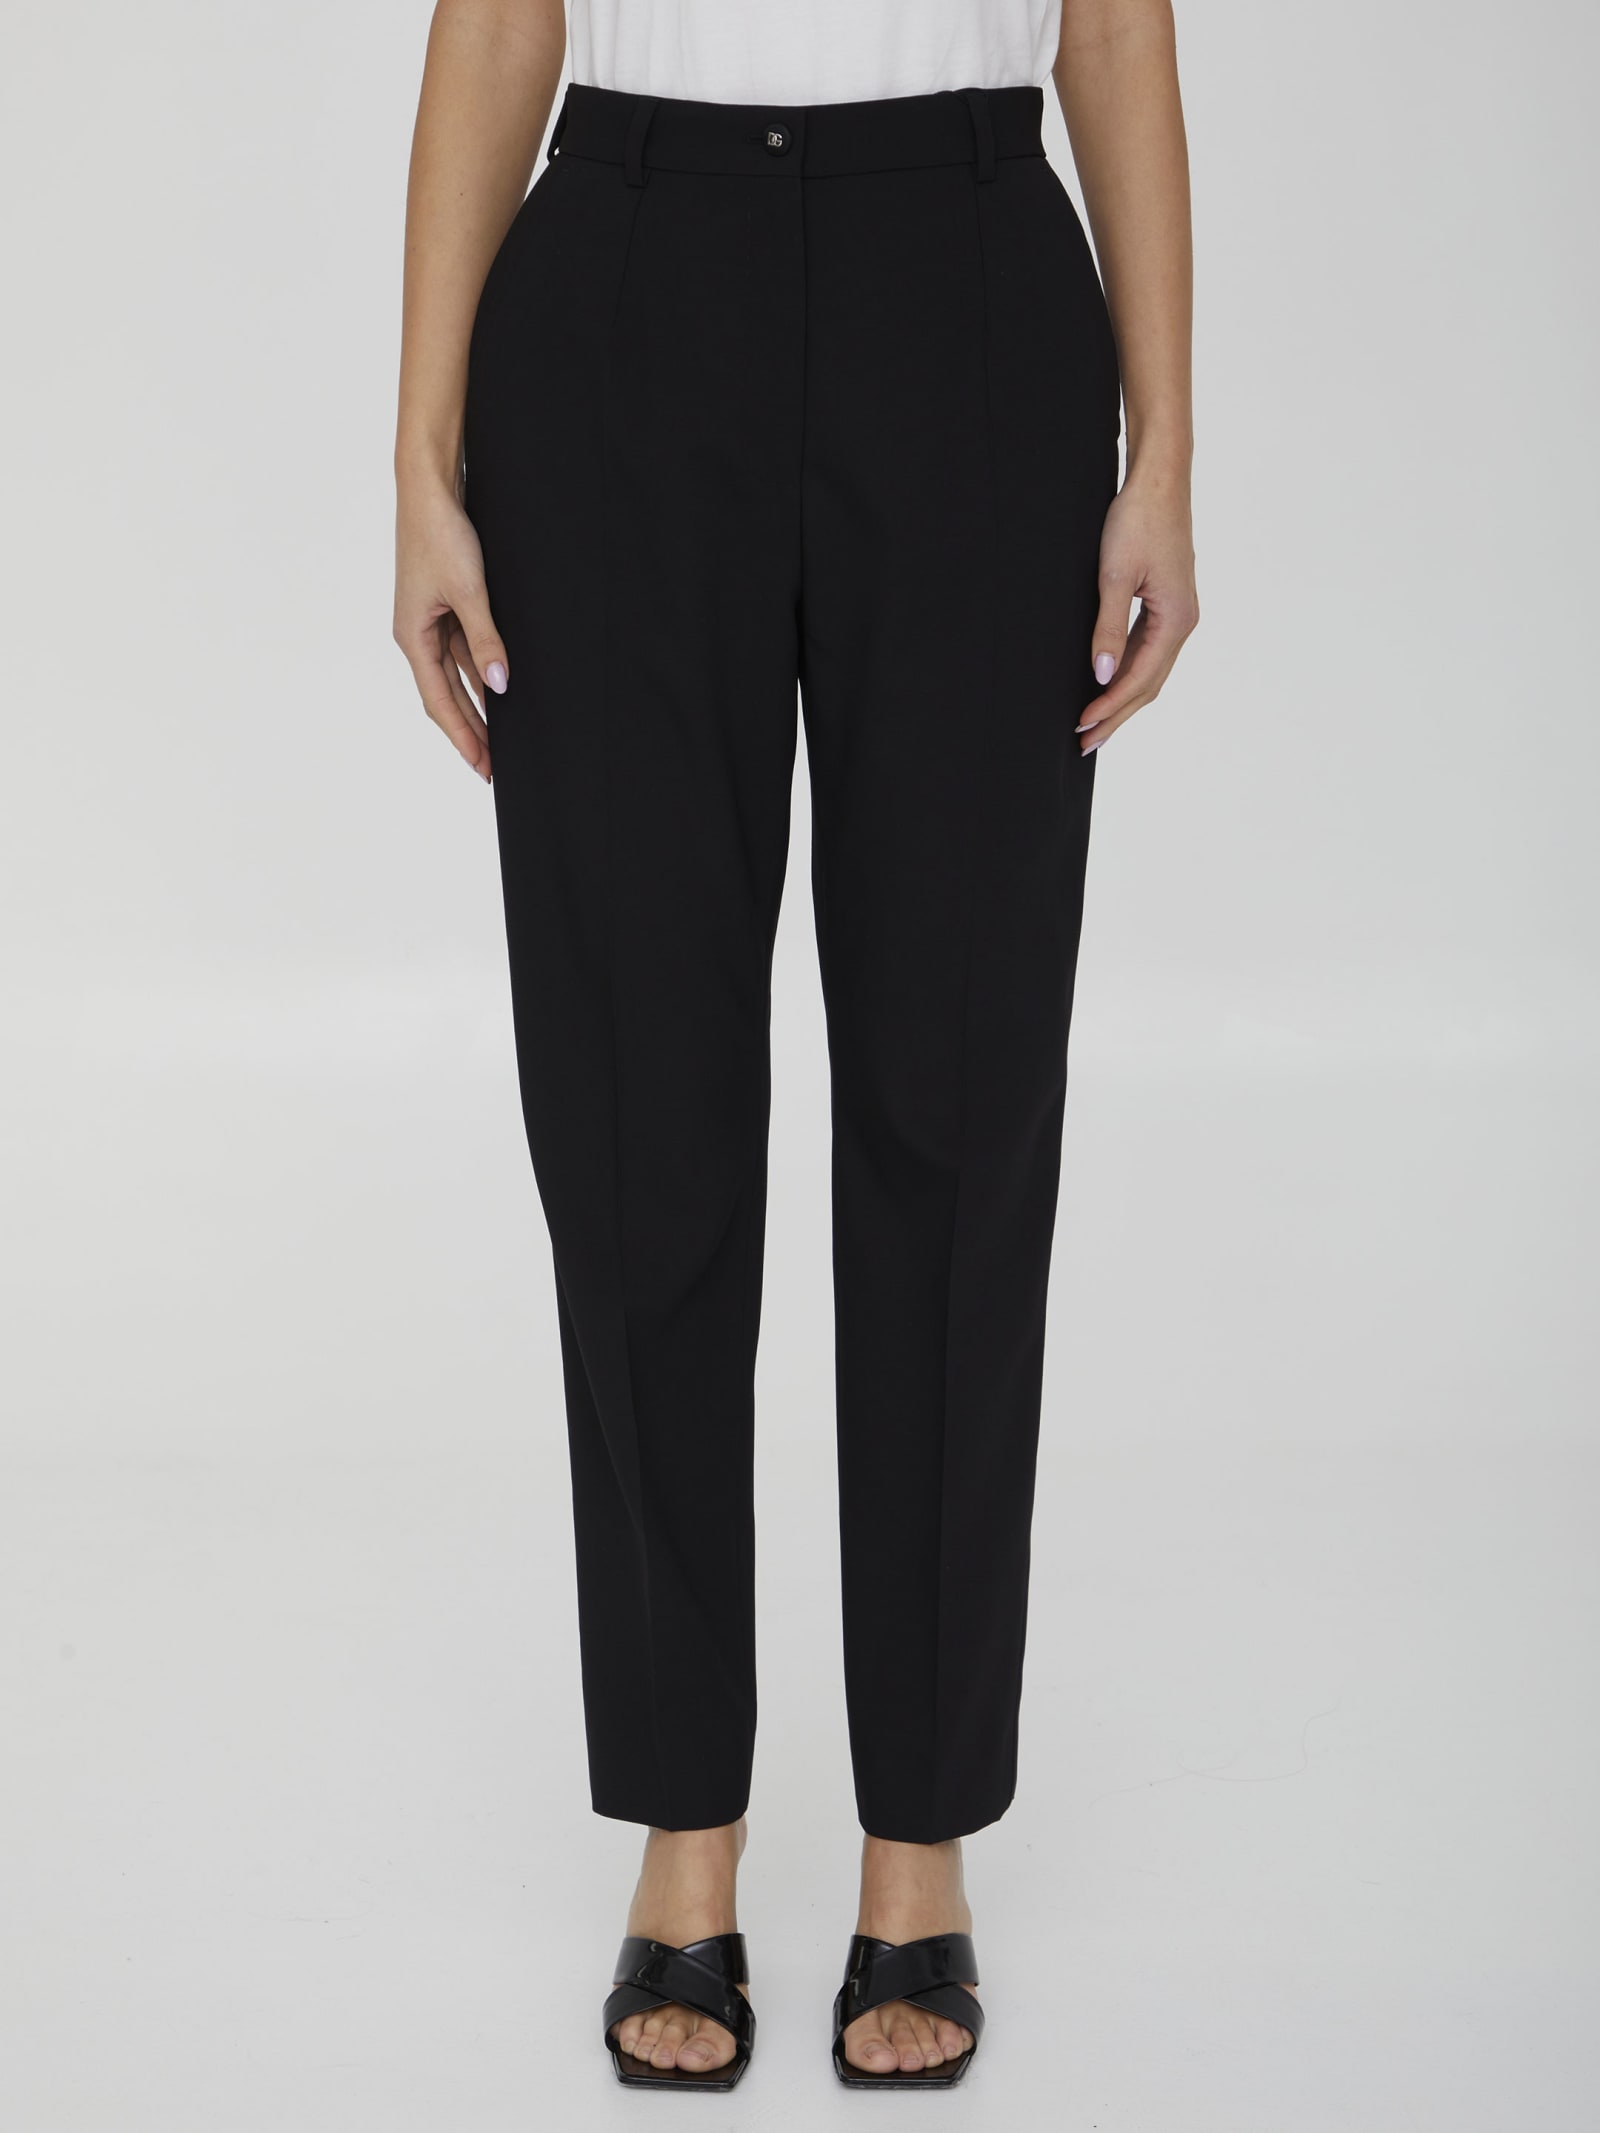 DOLCE & GABBANA BLACK TAILORED TROUSERS